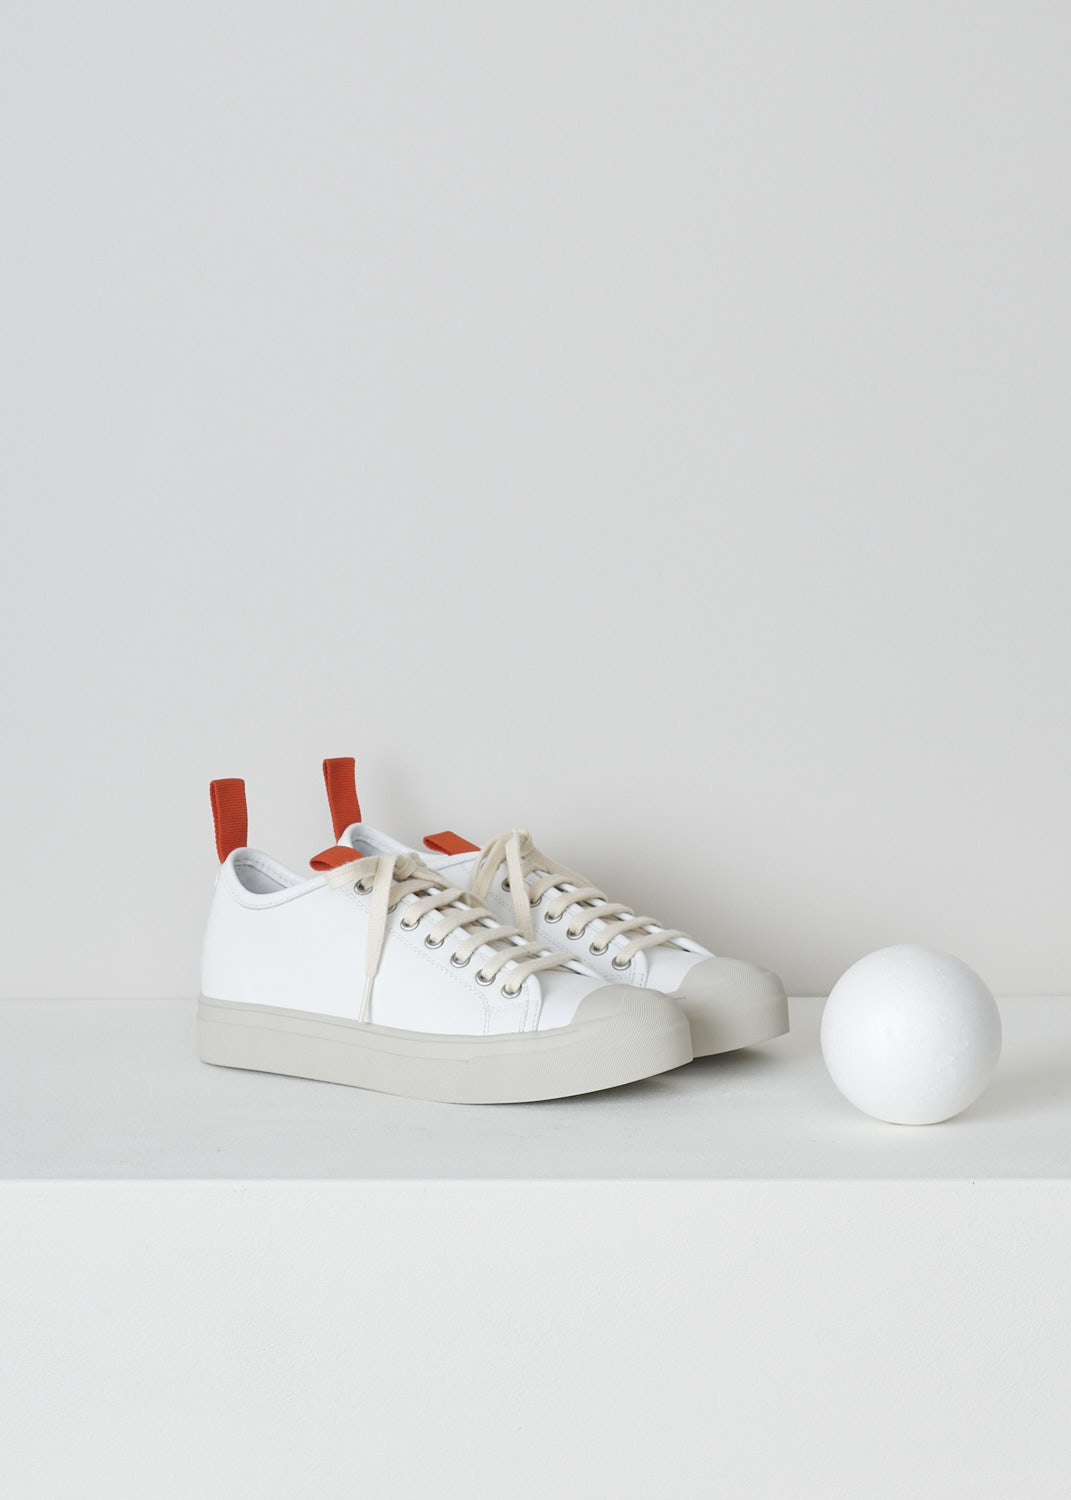 SOFIE Dâ€™HOORE, WHITE LEATHER SNEAKERS WITH RED ACCENTS, FABLE_LCOL_WHCL, White, Front, These white leather sneakers feature a front lace-up closure with white laces. Red pull-tabs can be found on the back of the heel and on the front of the tongue. These sneakers have a round toe with a beige rubber toe cap that goes down into the rubber sole in that same beige color. 

